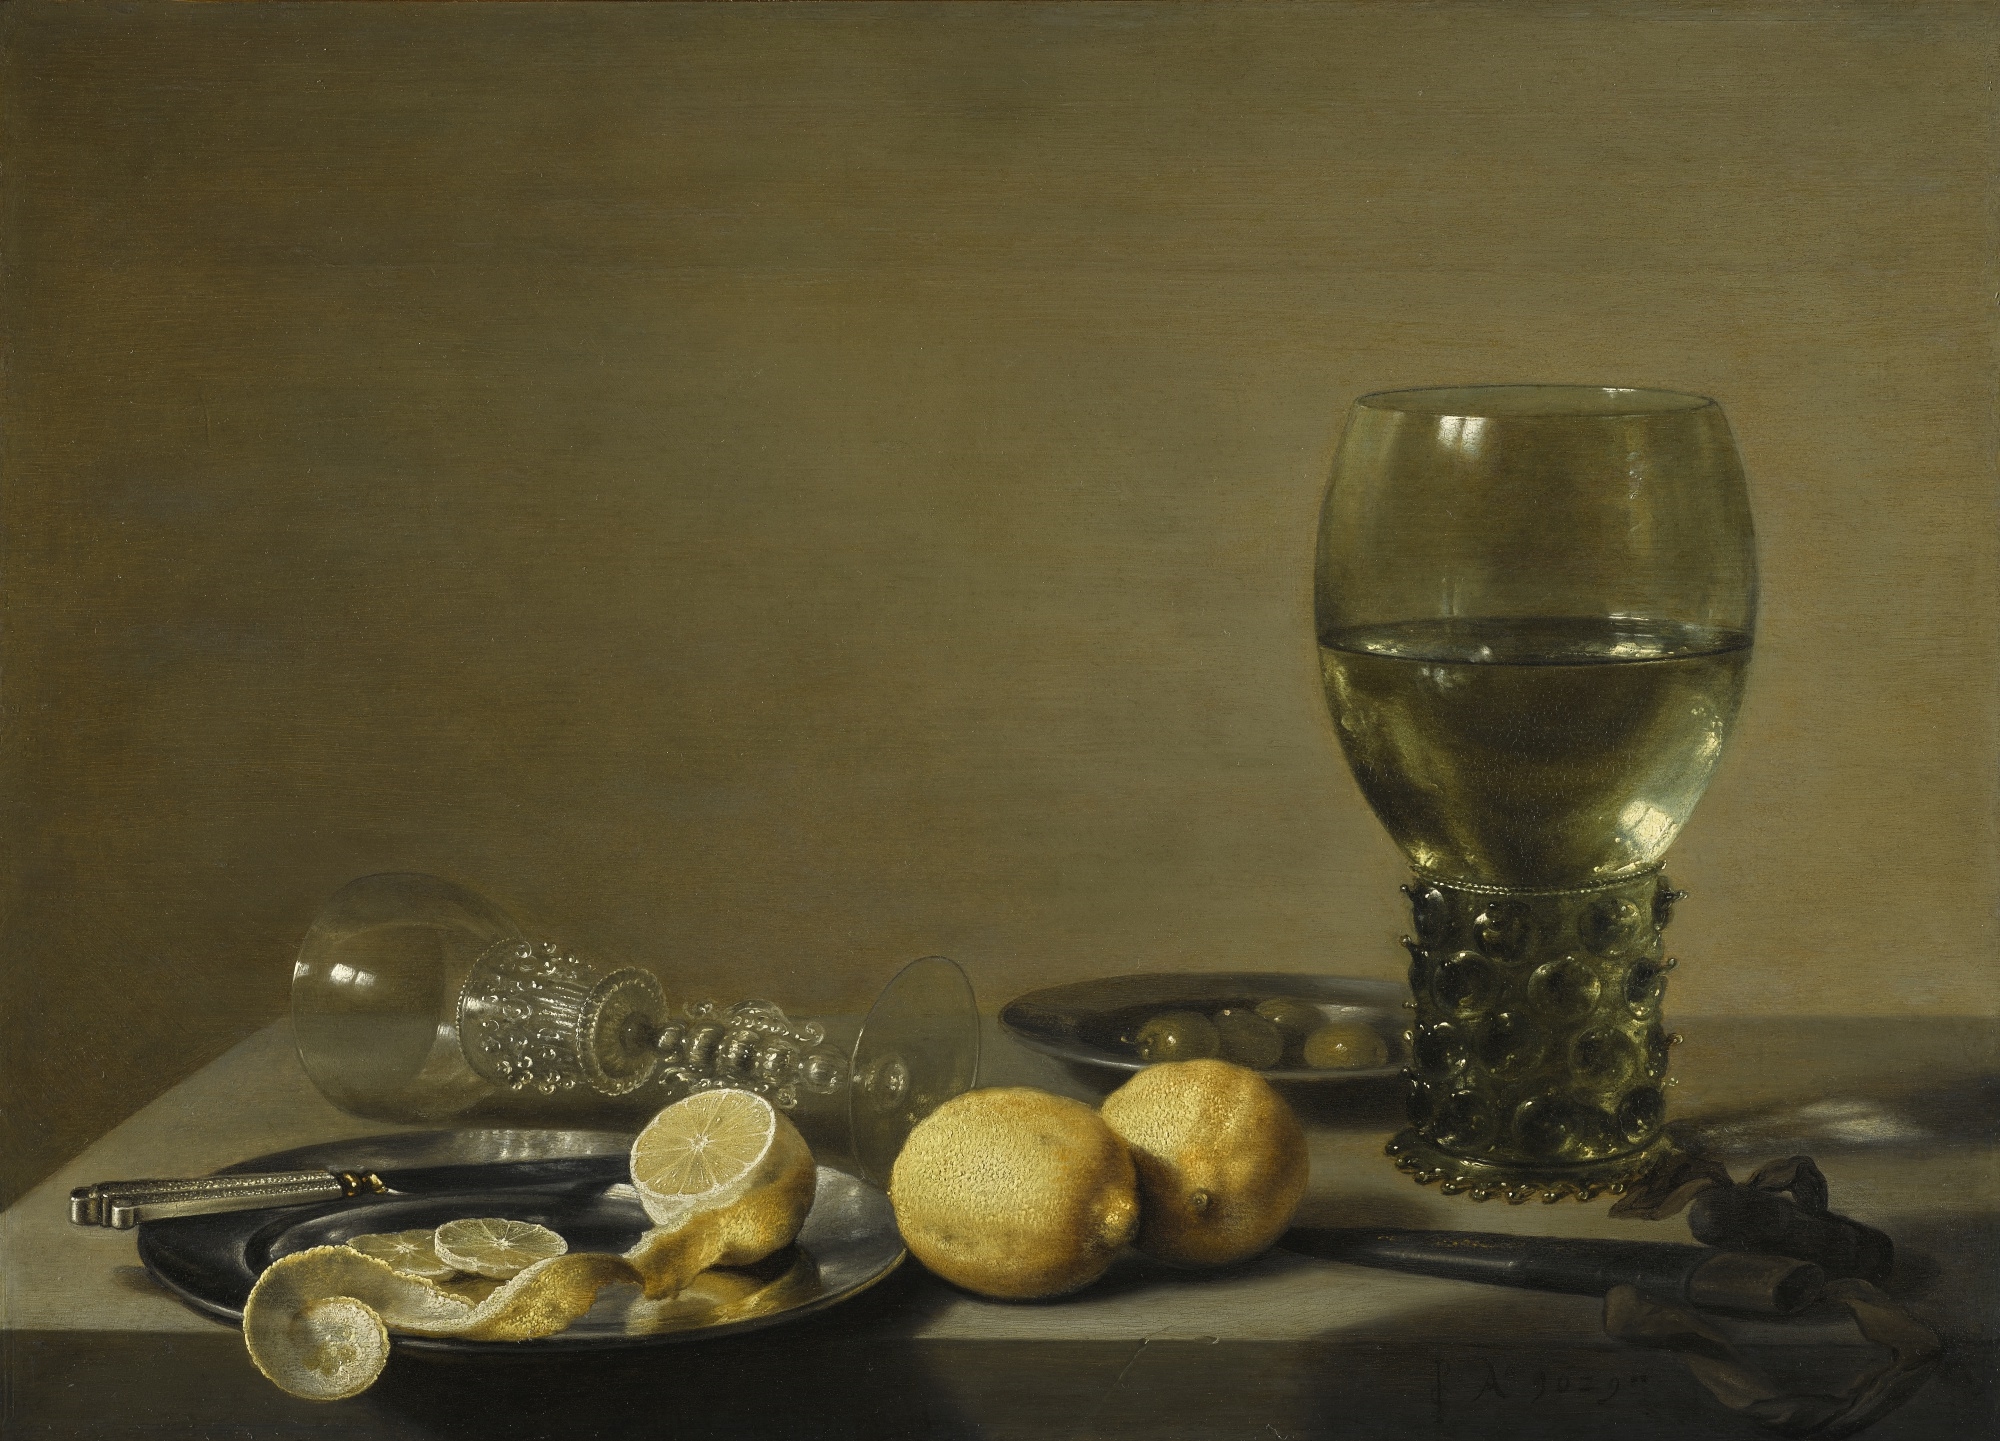 STILL LIFE OF LEMONS AND OLIVES, PEWTER PLATES, A ROEMER AND A FAÇON-DE-VENISE WINE GLASS ON A LEDGE by Pieter Claesz, 1629